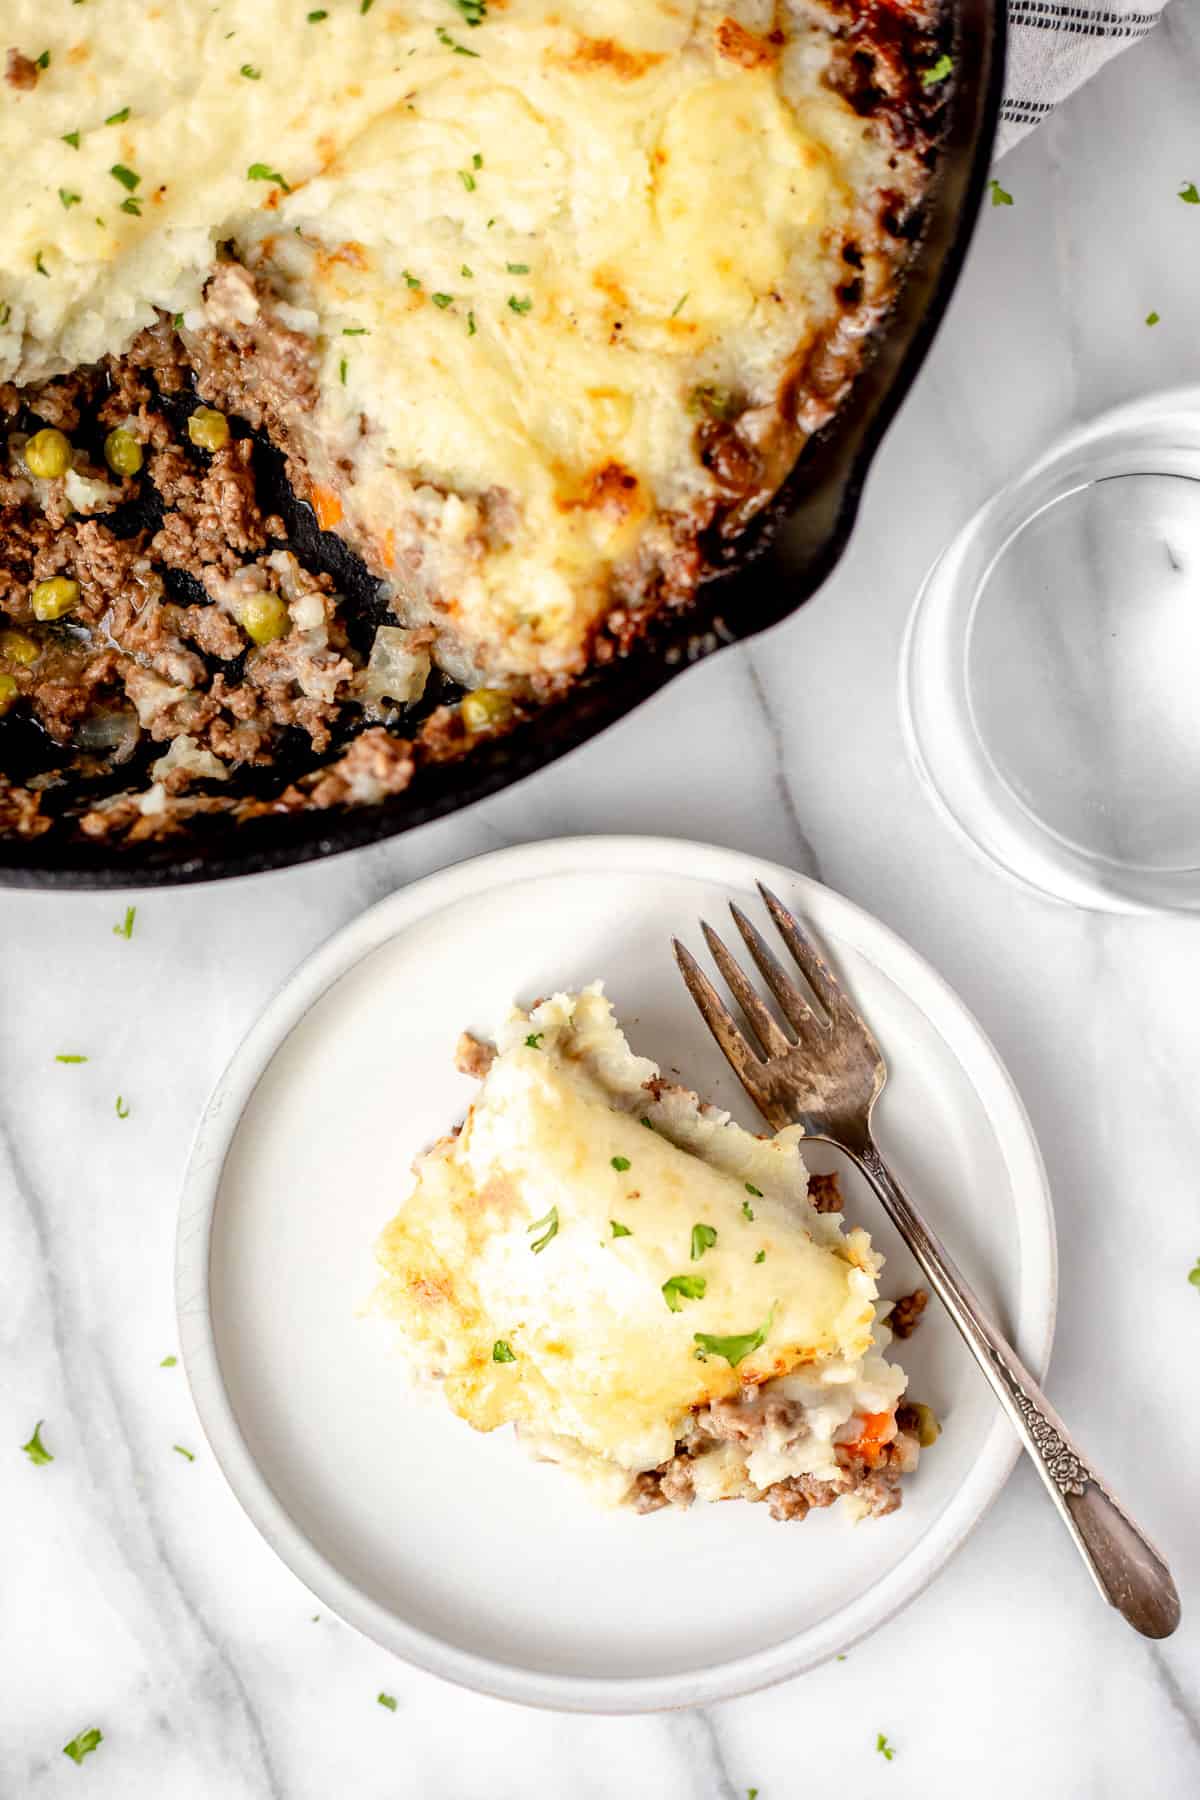 Overhead of a serving of Shepherd's Pie on a white plate with a fork with a cast iron skillet with more Shepherd's Pie partially showing.